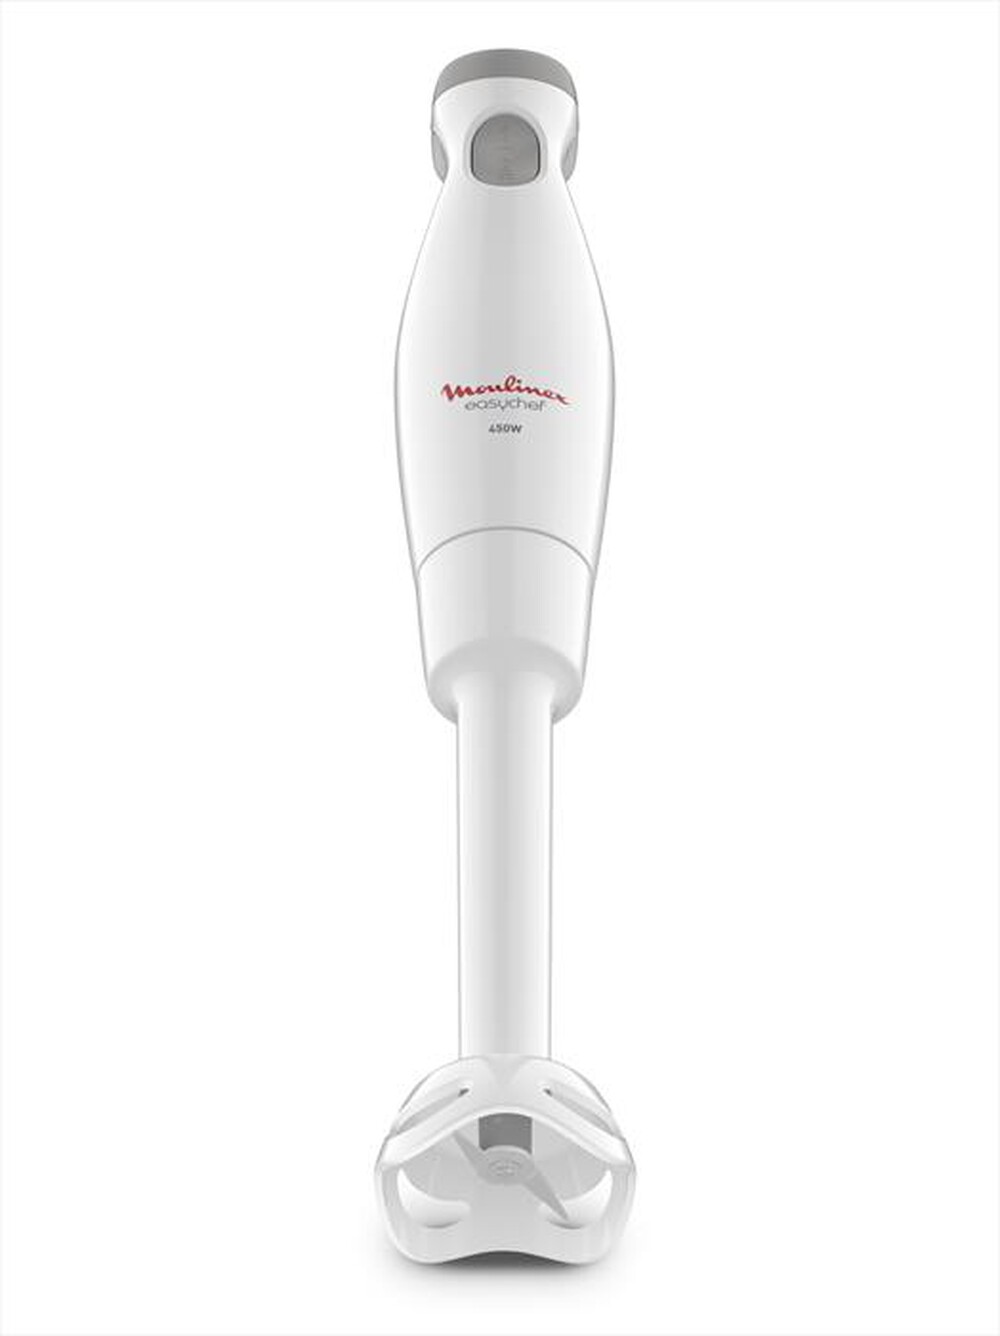 "MOULINEX - DD45A1 Easychef, Mixer ad Immersione-White/Pepper"